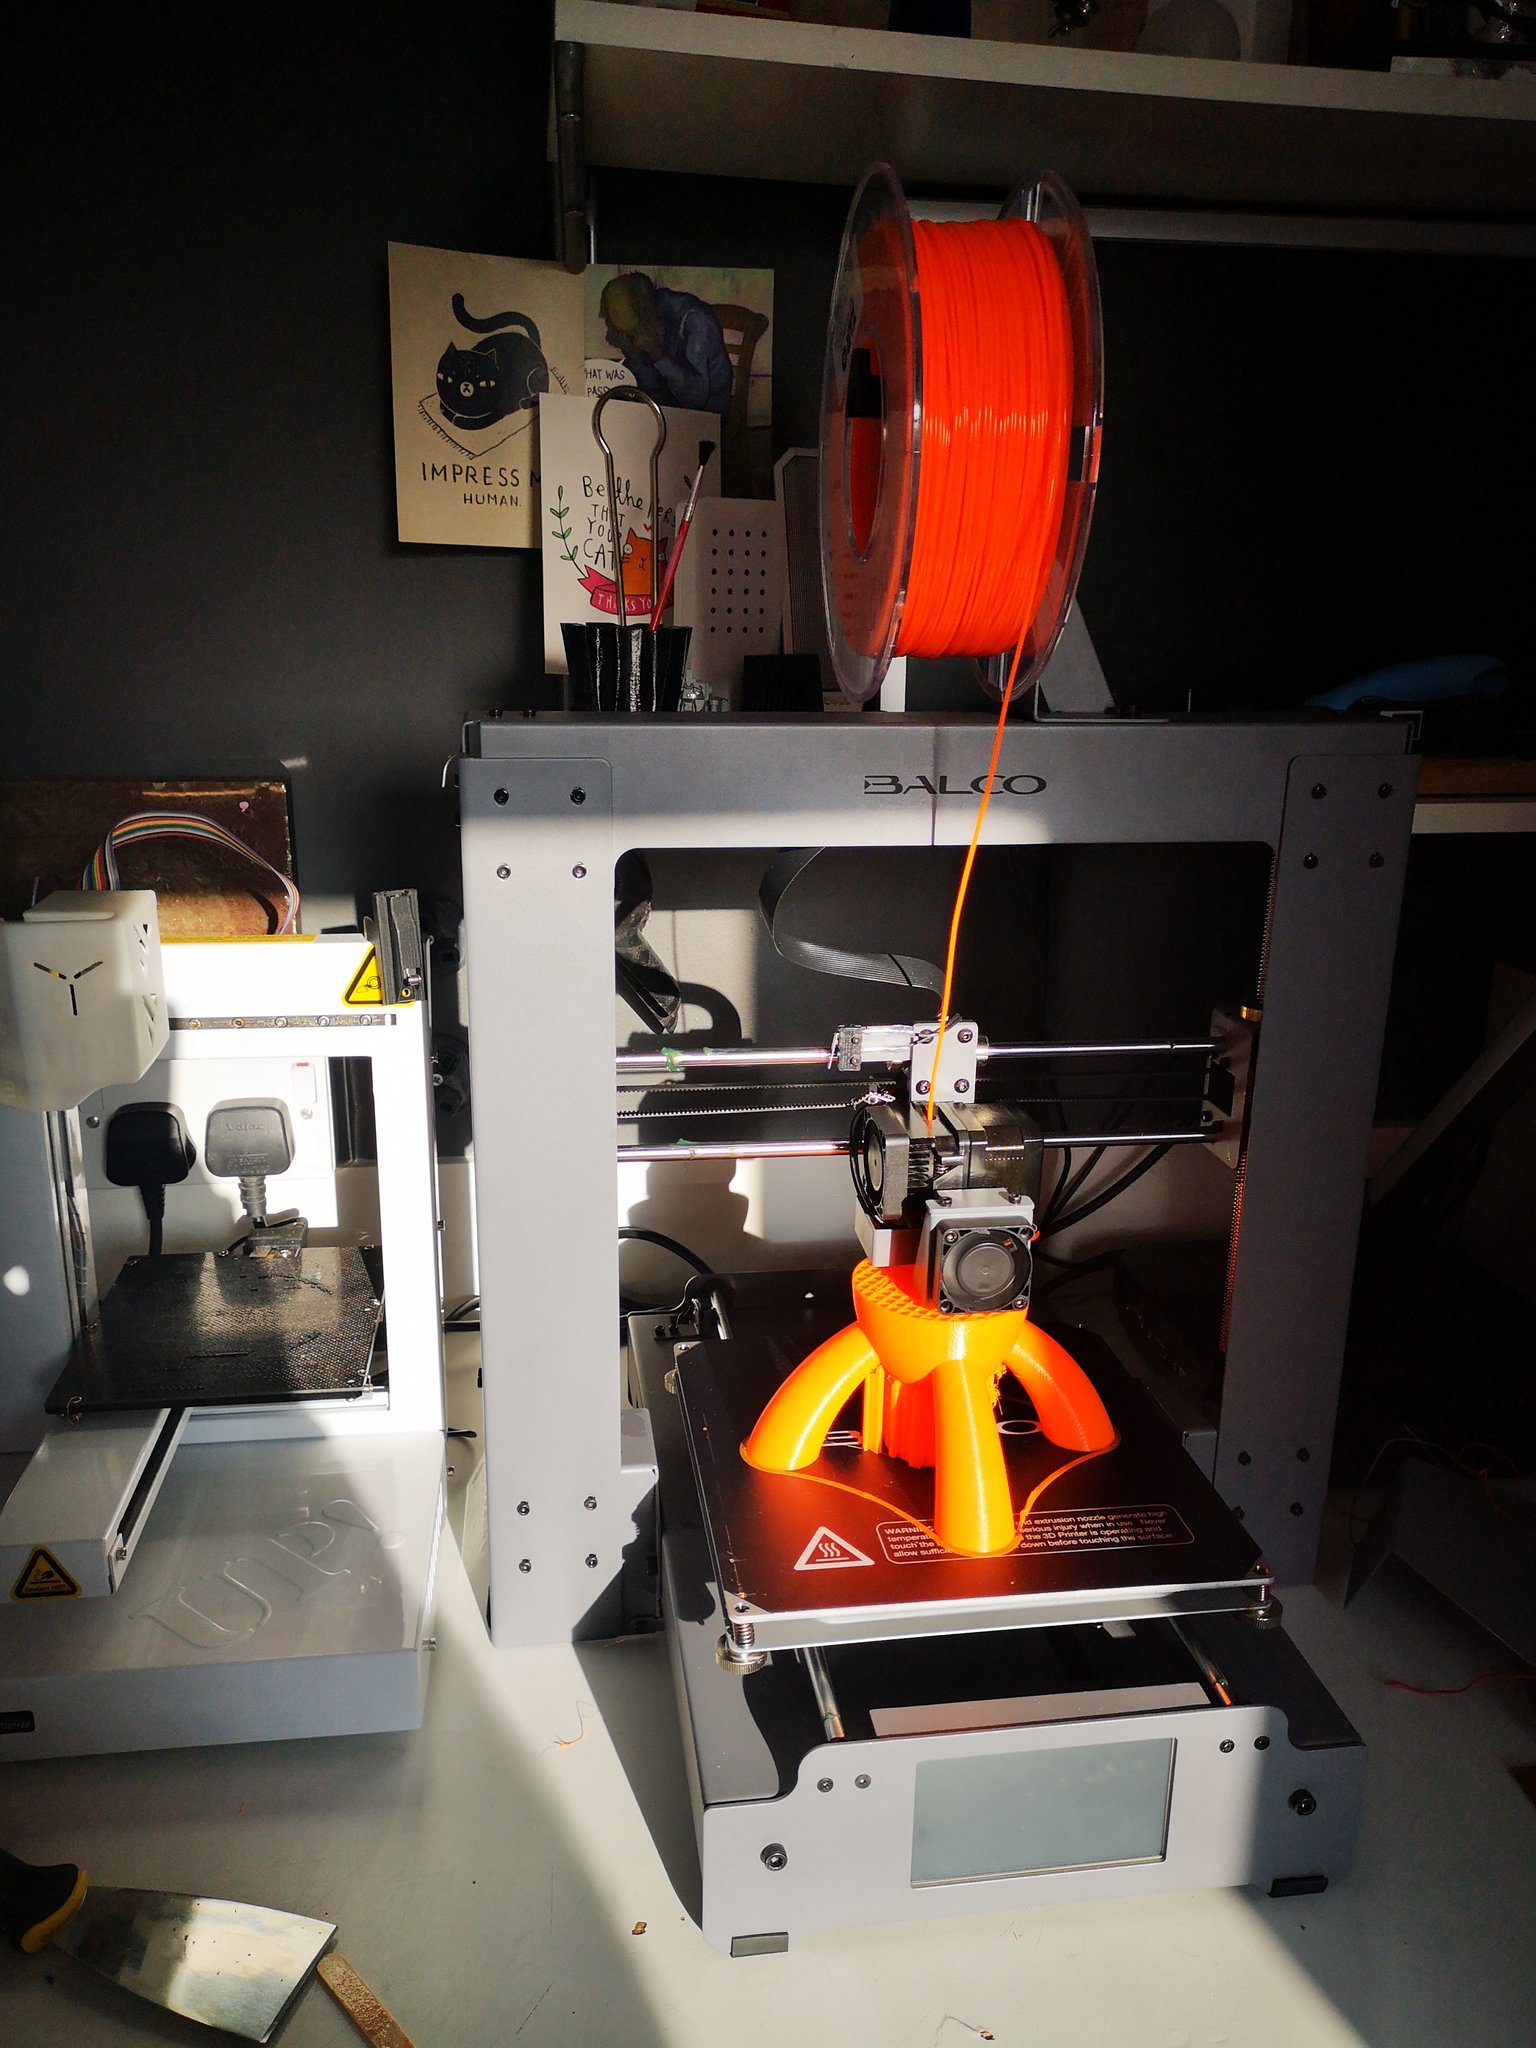 at føre Trolley diagonal DesignClass on Twitter: "So, what do we think of @AldiUK's £249 Balco 3D  printer...? Utterly awesome. It requires a tad calibration, but fantastic  value for money. With a large, heated print-bed and